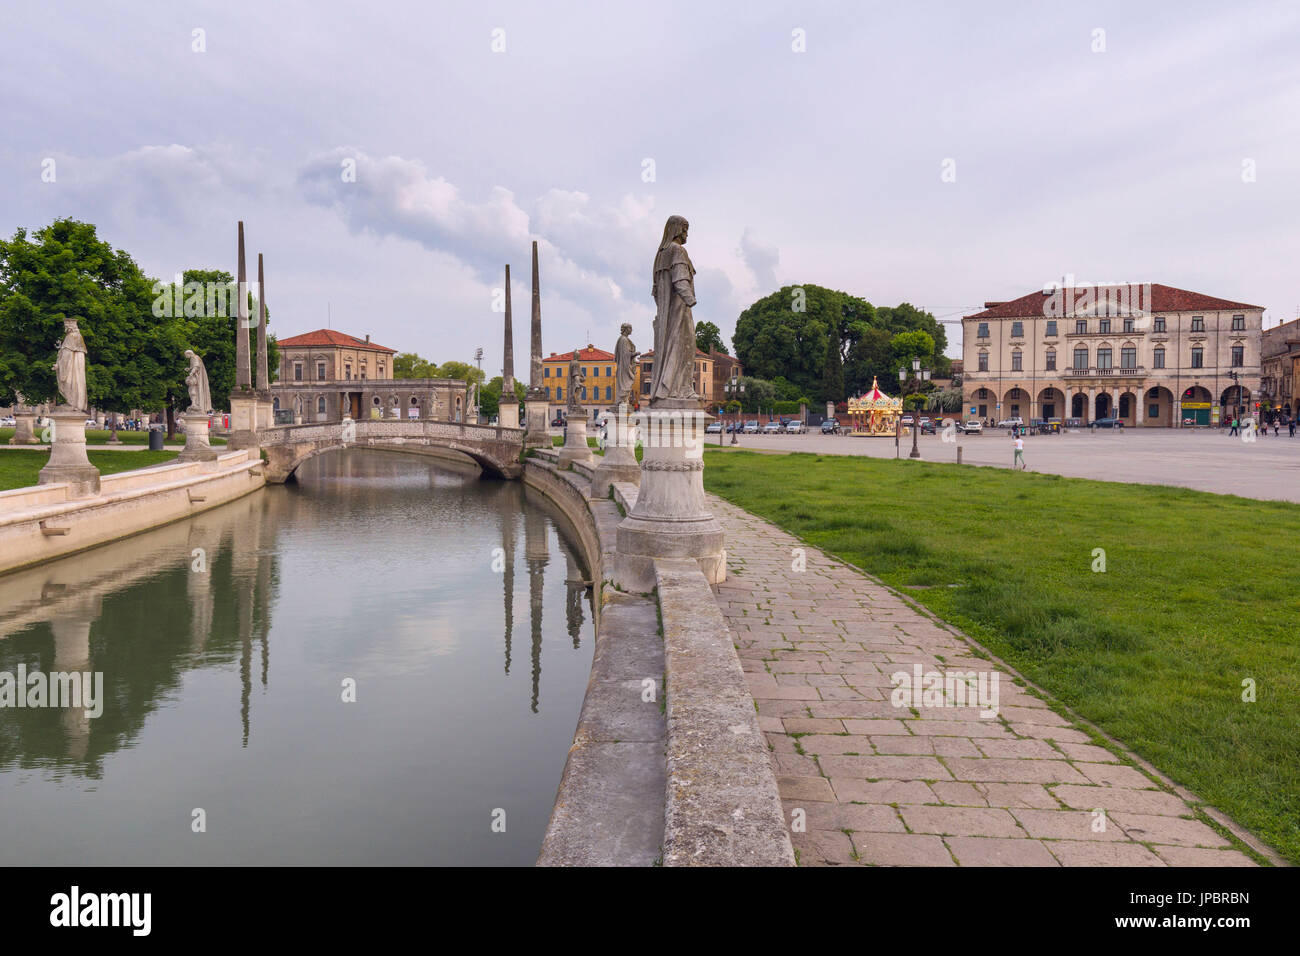 View of the Prato della Valle, Padua, Italy on an overcast day with reflections of the statues in the water of the elliptical canal and an historic building in the background, veneto, italy, europe Stock Photo